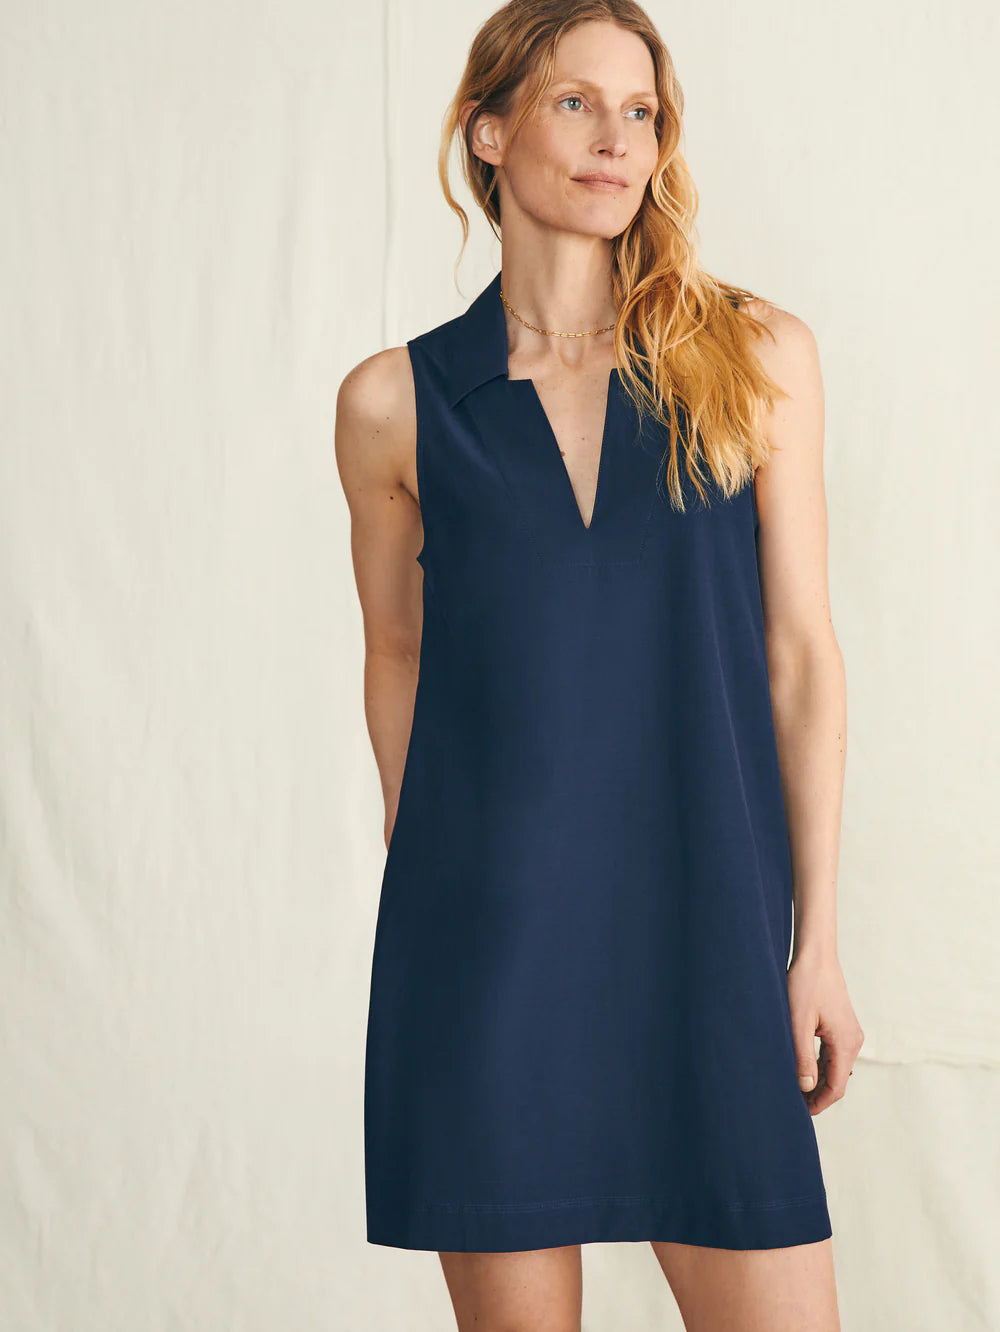 Faherty All Day Polo Dress